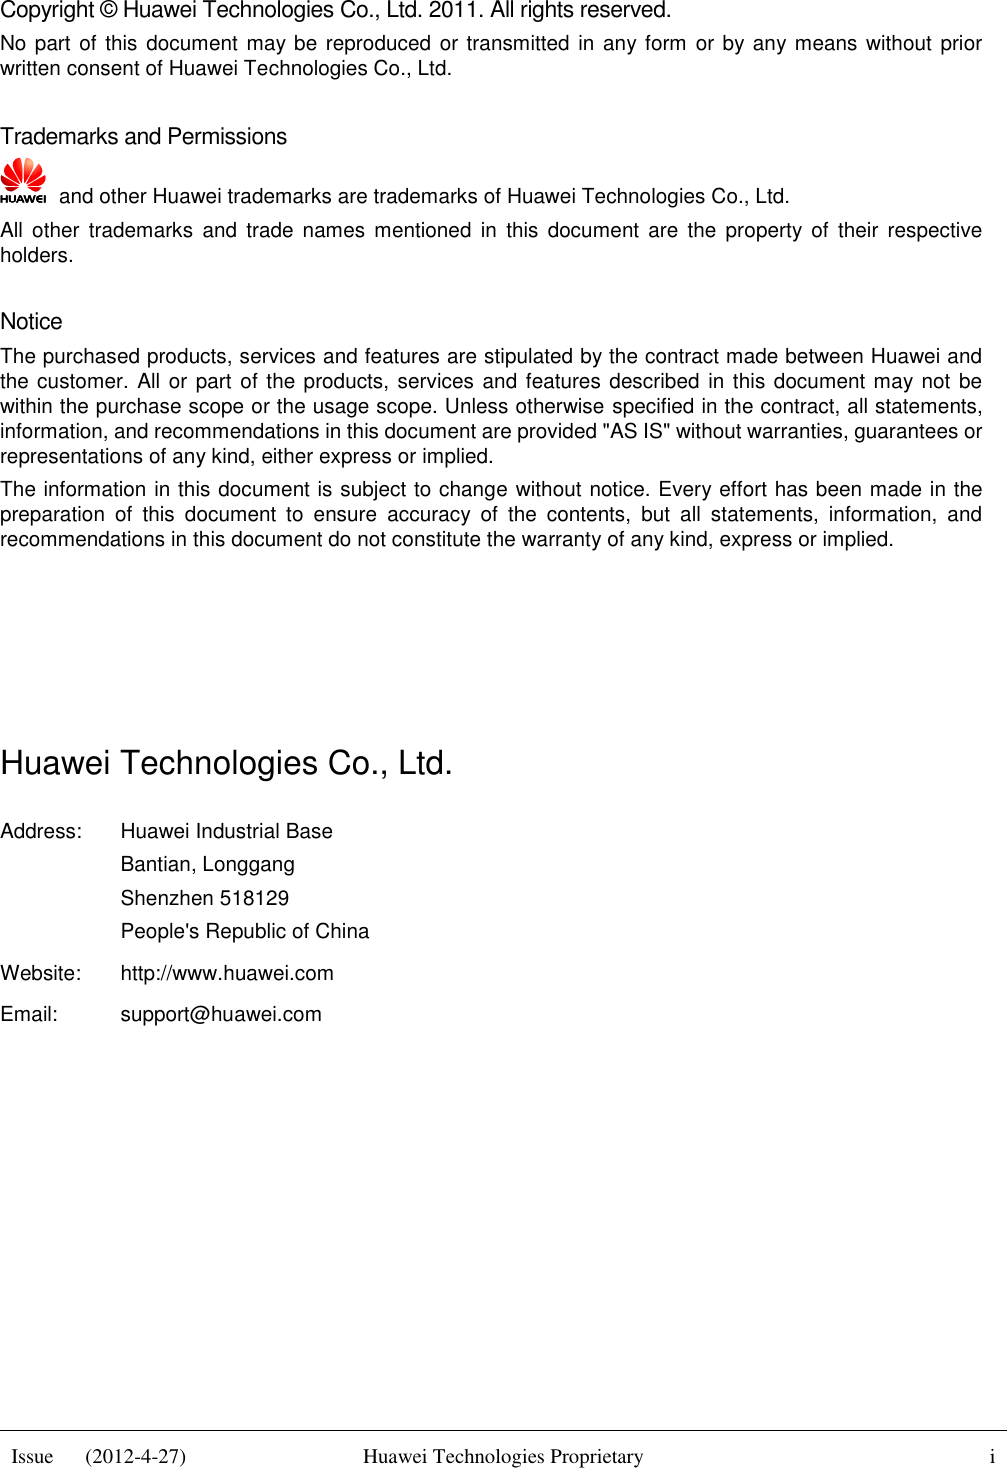  Issue      (2012-4-27) Huawei Technologies Proprietary i    Copyright © Huawei Technologies Co., Ltd. 2011. All rights reserved. No part of this  document  may be reproduced or transmitted in any form or by any means without prior written consent of Huawei Technologies Co., Ltd.  Trademarks and Permissions   and other Huawei trademarks are trademarks of Huawei Technologies Co., Ltd. All  other  trademarks  and  trade  names  mentioned  in  this  document  are  the  property  of  their  respective holders.  Notice The purchased products, services and features are stipulated by the contract made between Huawei and the customer.  All or part of the products, services and features described in this document may not be within the purchase scope or the usage scope. Unless otherwise specified in the contract, all statements, information, and recommendations in this document are provided &quot;AS IS&quot; without warranties, guarantees or representations of any kind, either express or implied. The information in this document is subject to change without notice. Every effort has been made in the preparation  of  this  document  to  ensure  accuracy  of  the  contents,  but  all  statements,  information,  and recommendations in this document do not constitute the warranty of any kind, express or implied.     Huawei Technologies Co., Ltd. Address: Huawei Industrial Base Bantian, Longgang Shenzhen 518129 People&apos;s Republic of China Website: http://www.huawei.com Email: support@huawei.com          